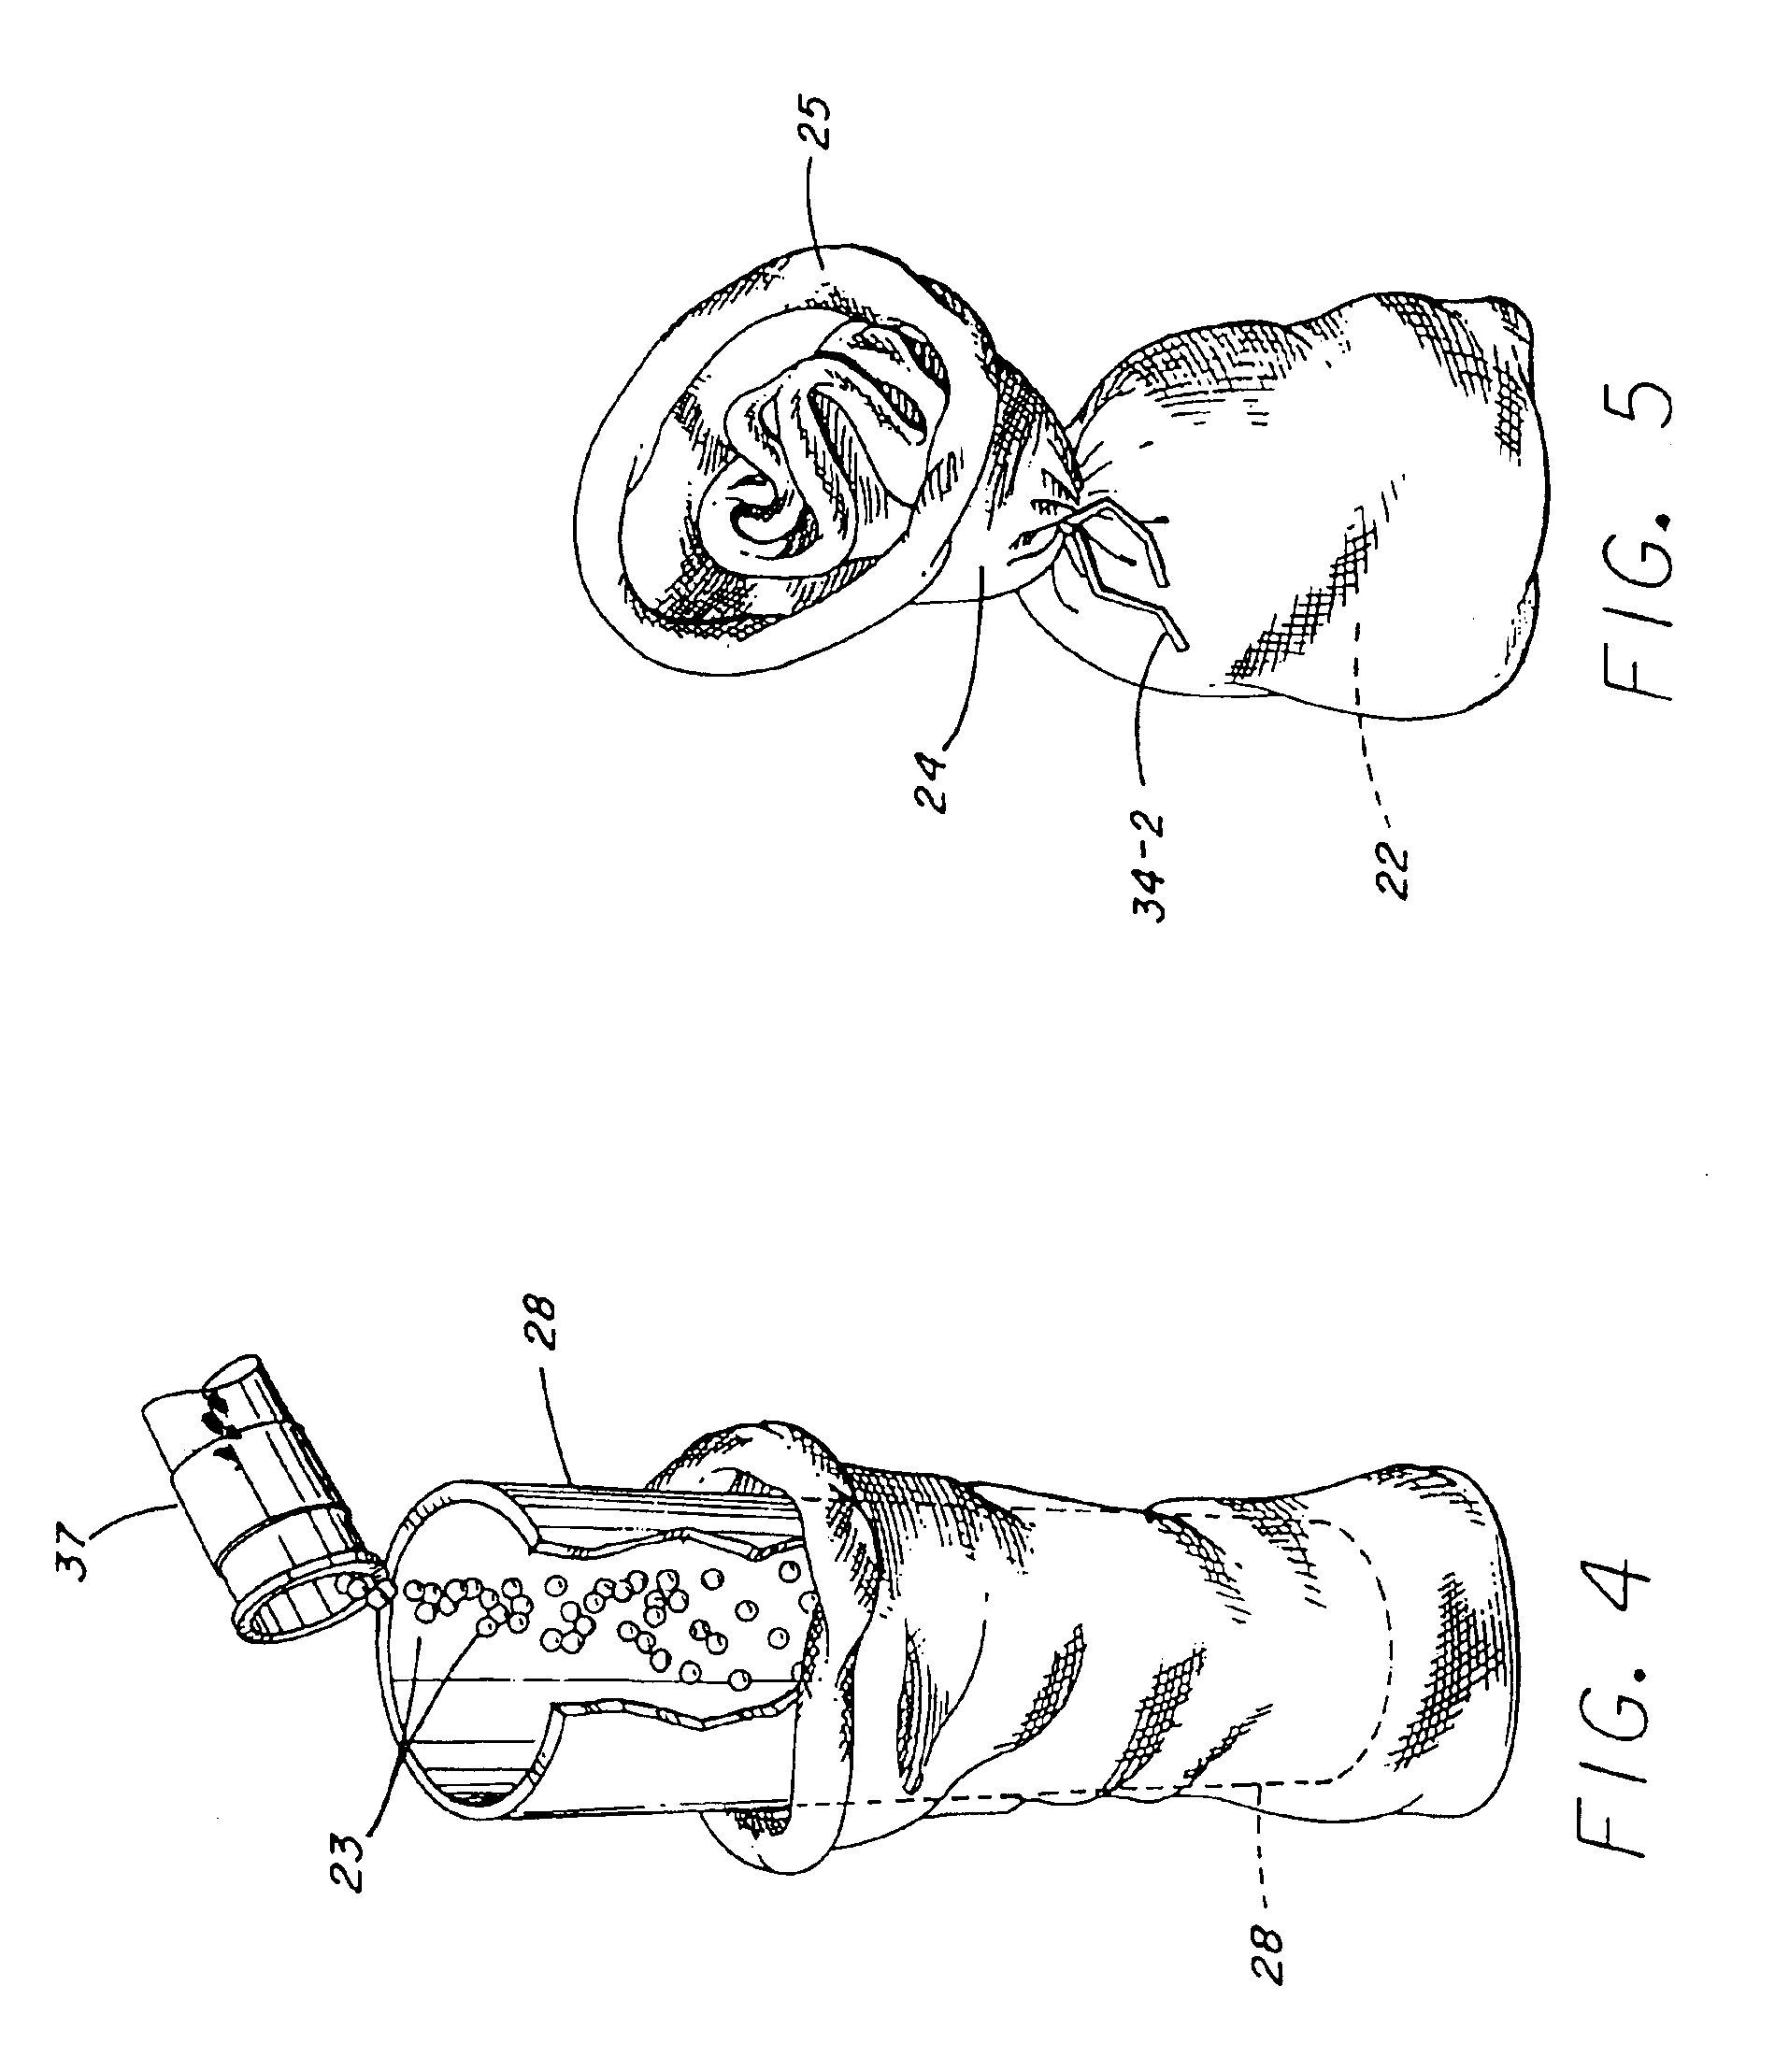 Method for producing a less lethal projectile